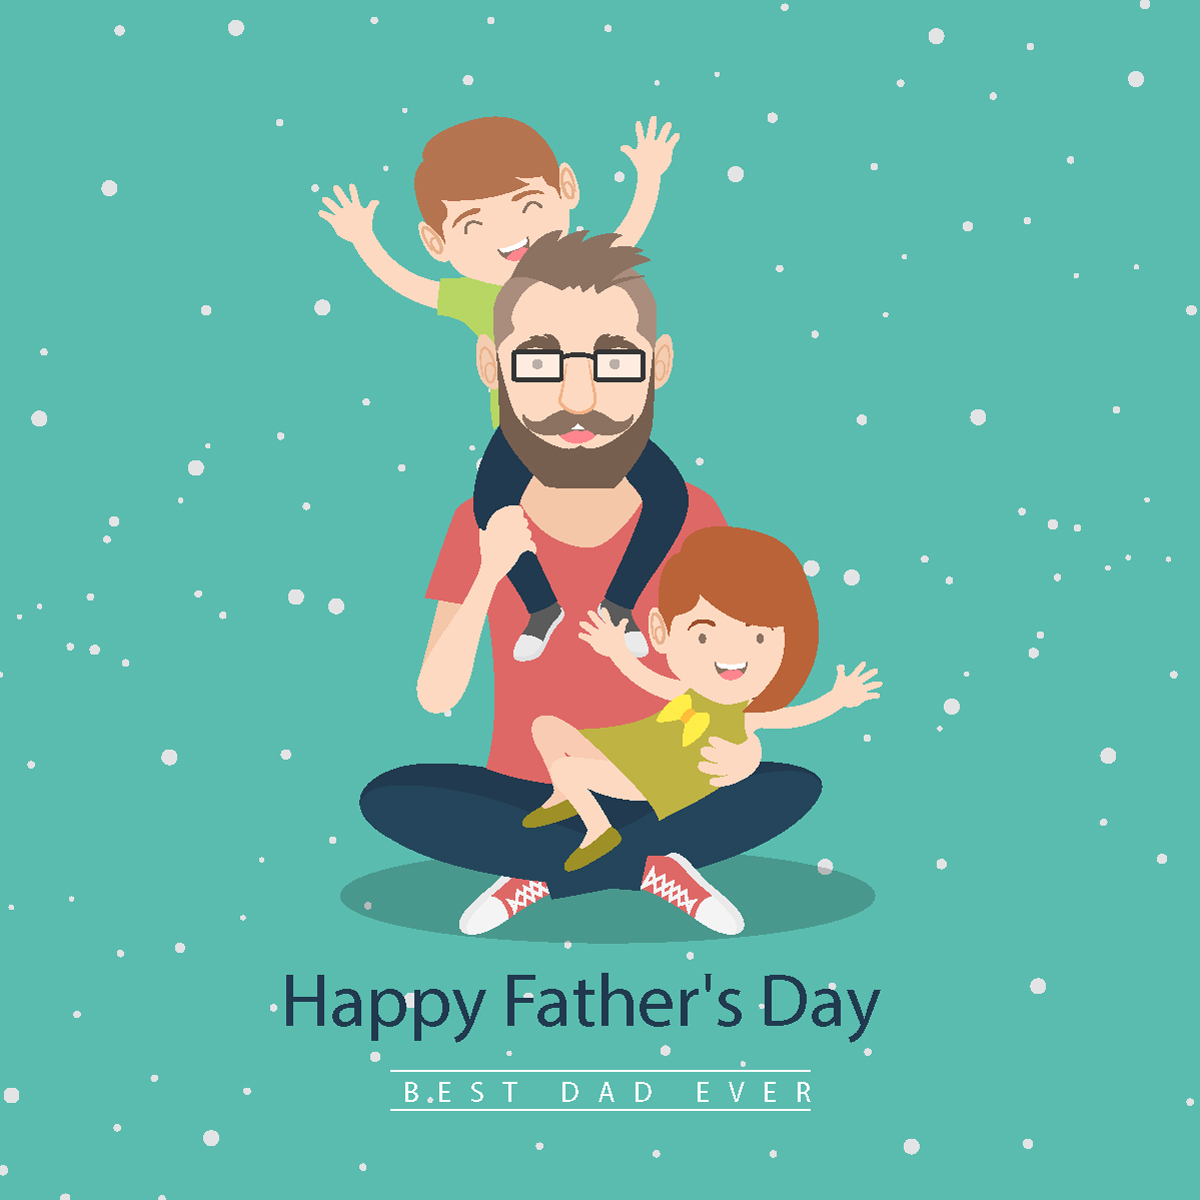 eCardMAX Demo version 11.0 - Father's Day - Dad and kids.